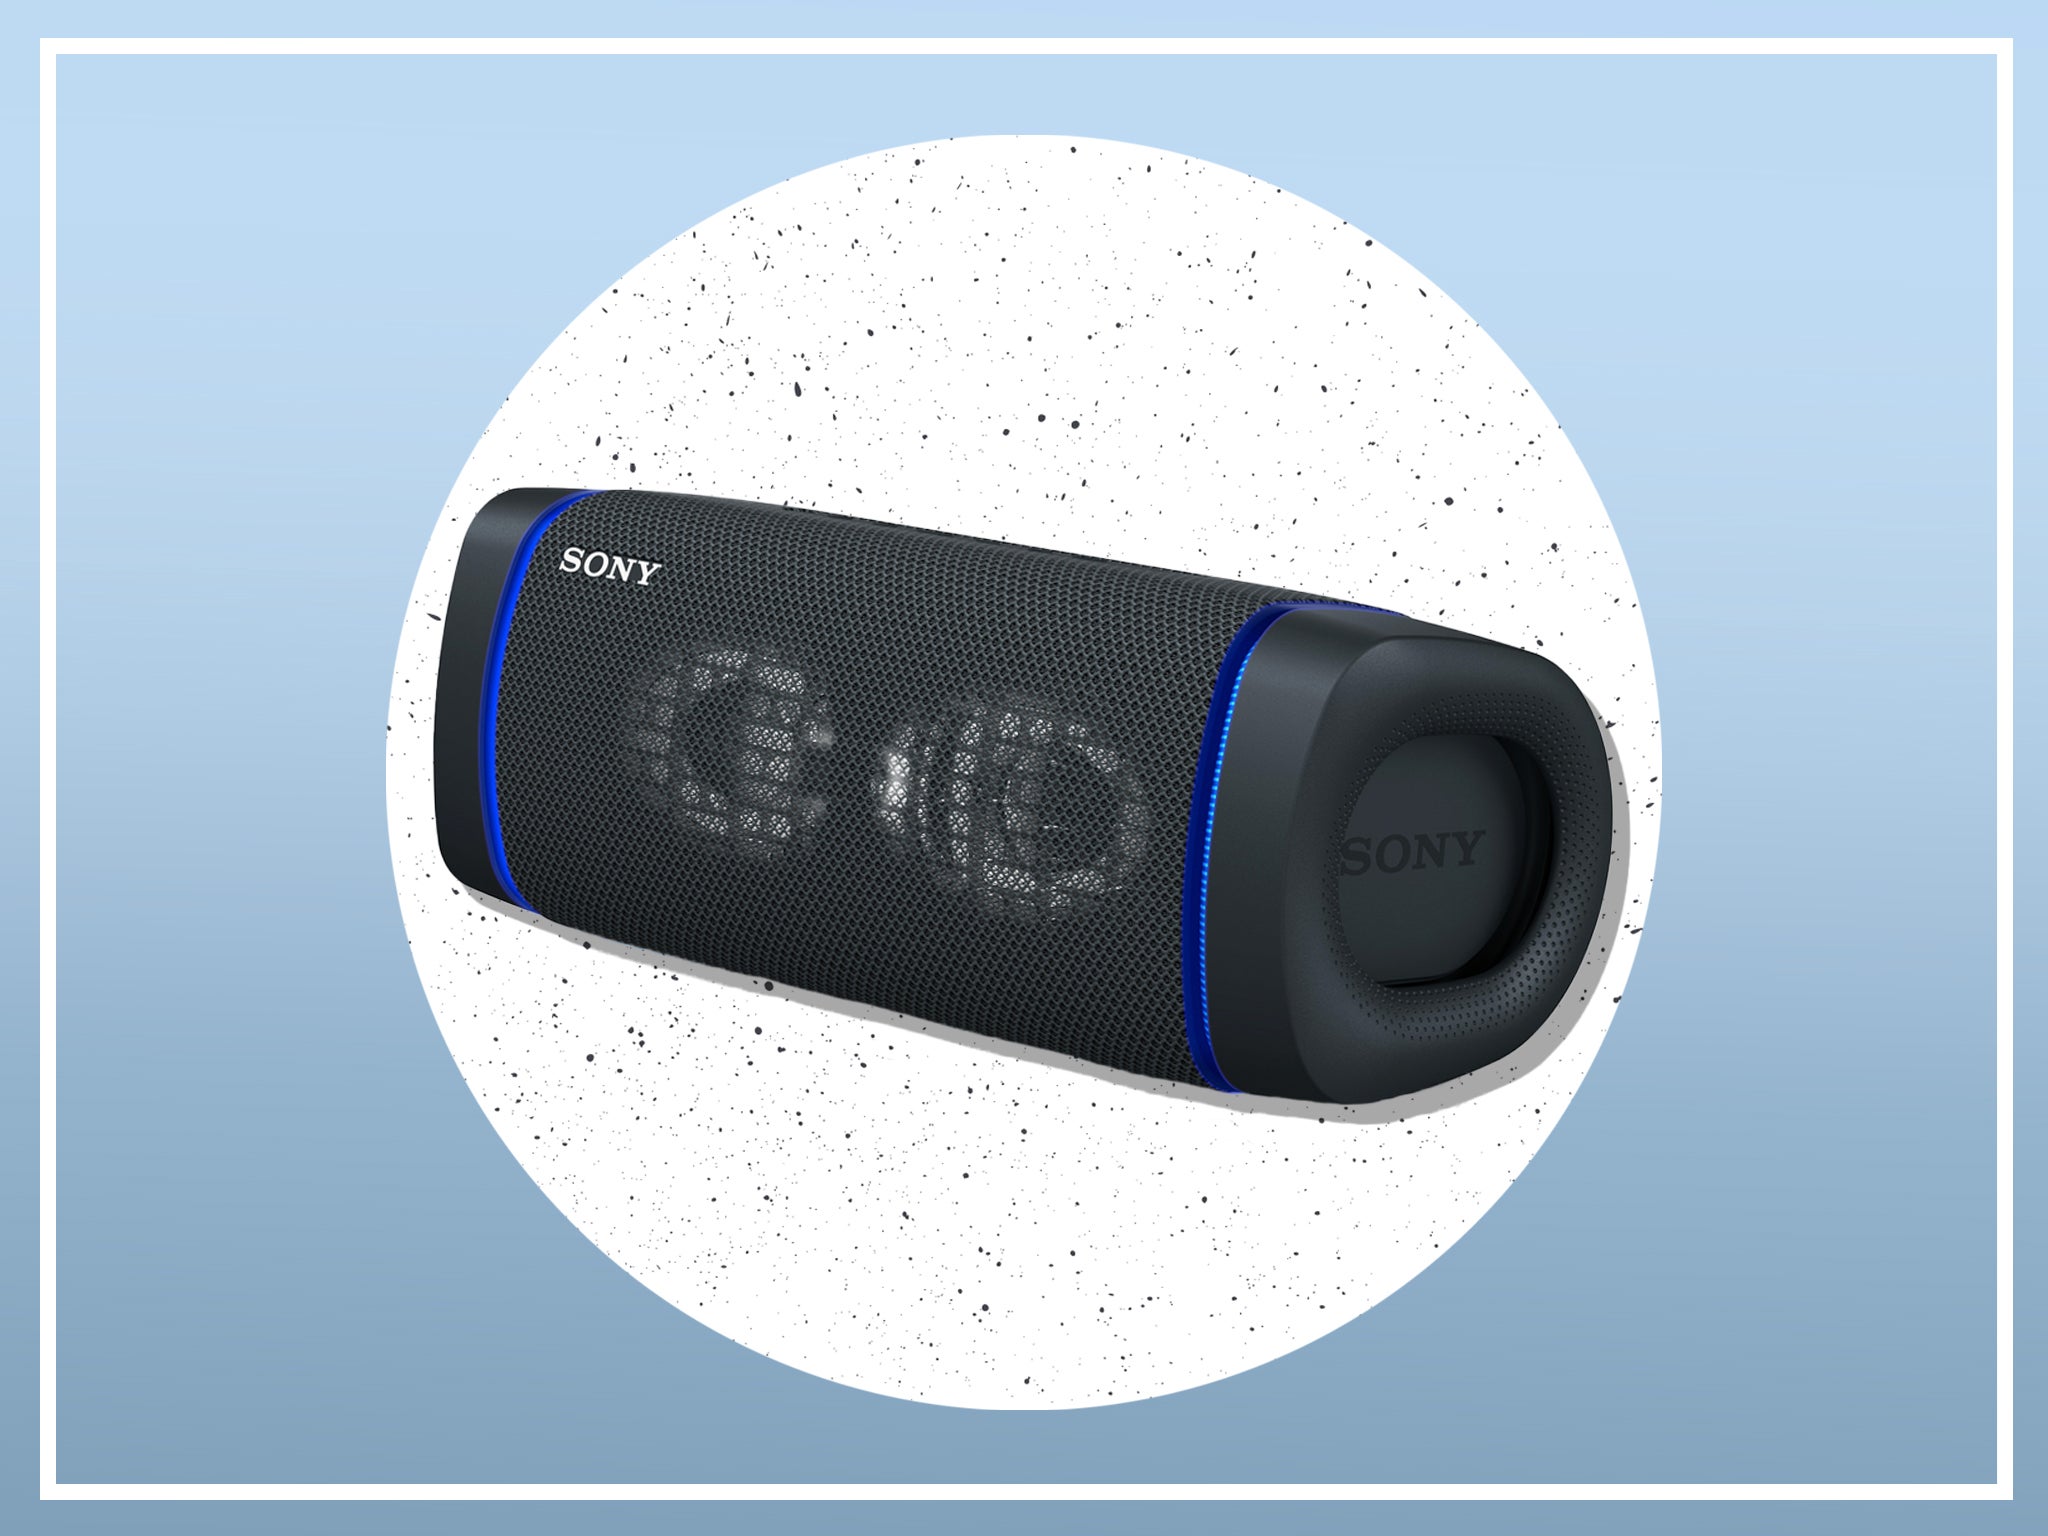 Sony SRS-XB33 review: Does the portable speaker deliver? | The